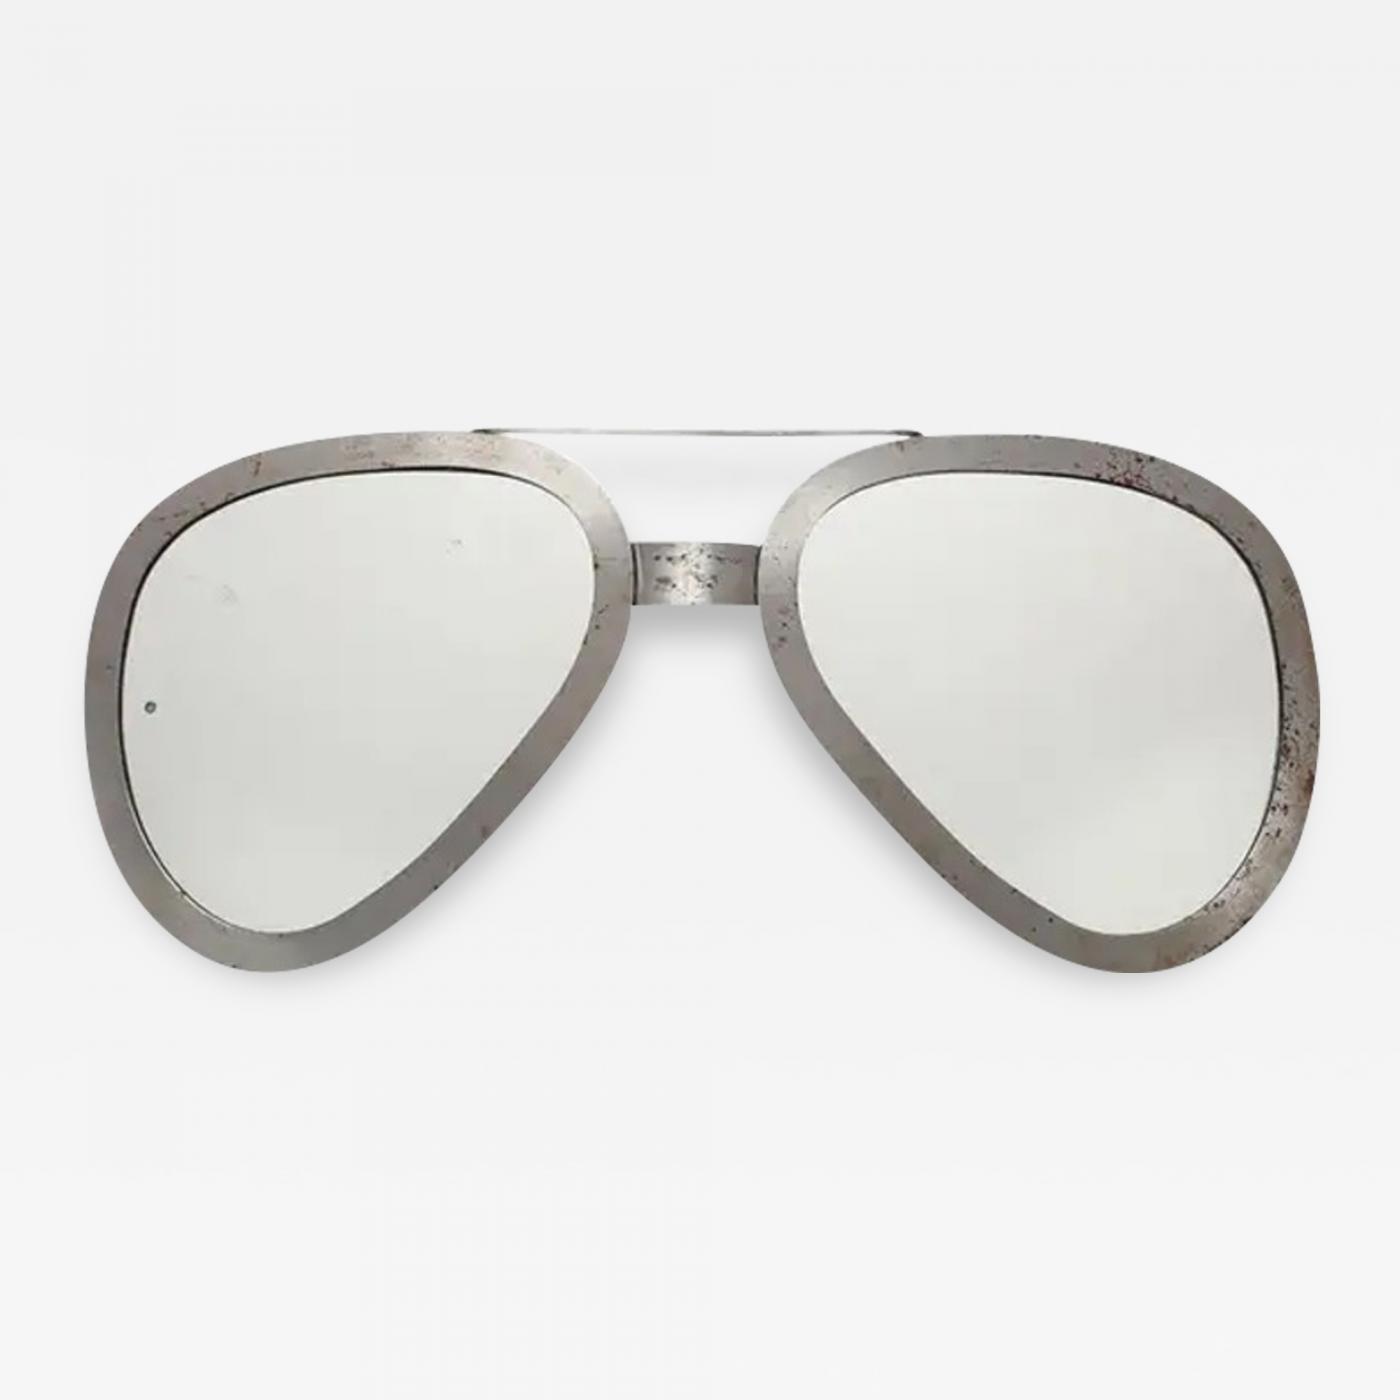 Details more than 220 curtis sunglasses best